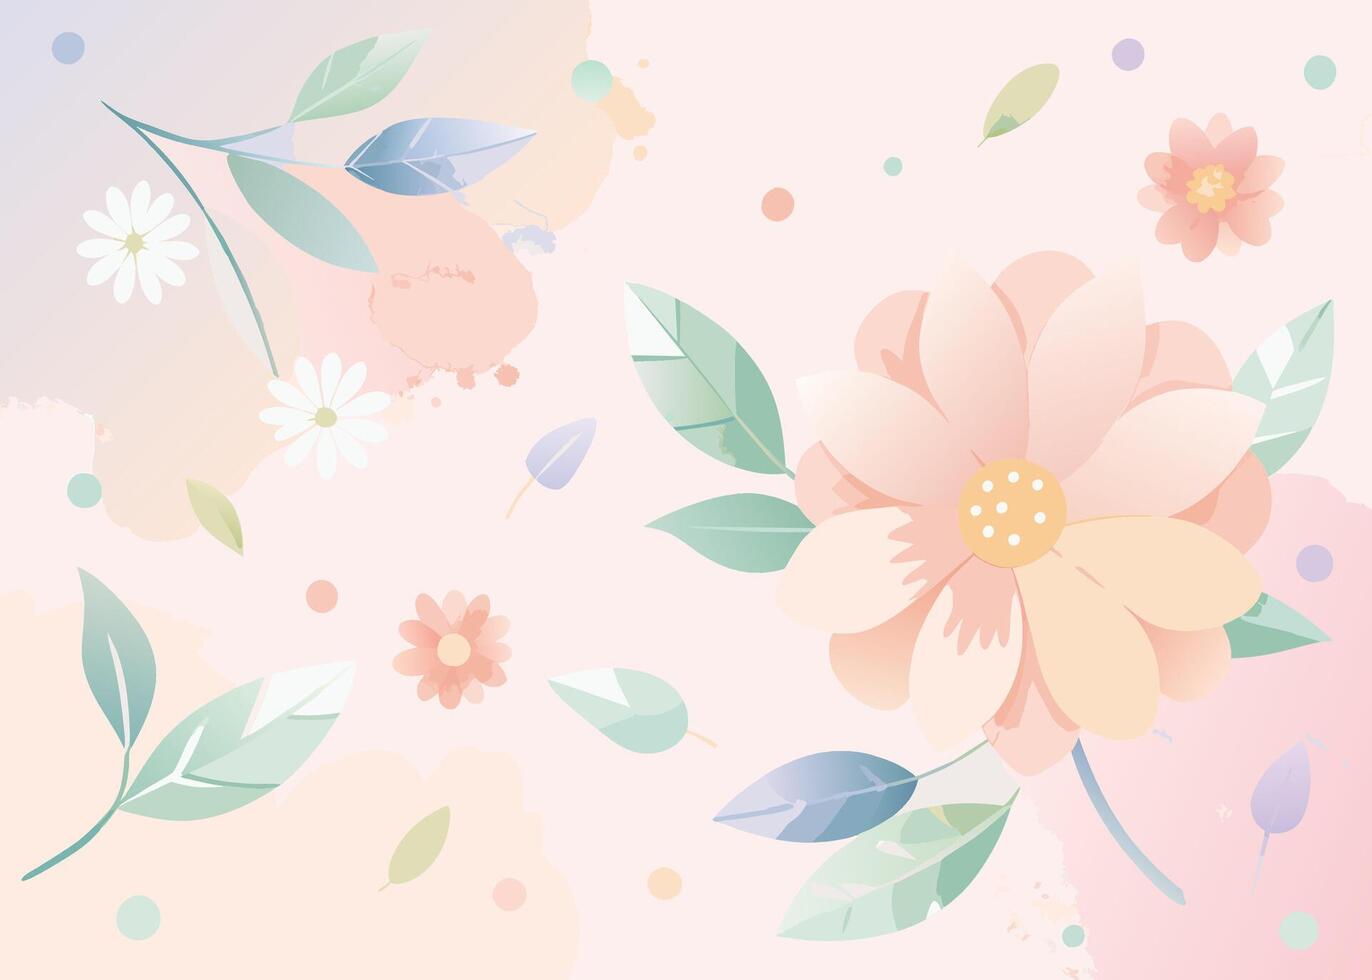 Floral background with flowers and leaves in pastel colors. Vector illustration.